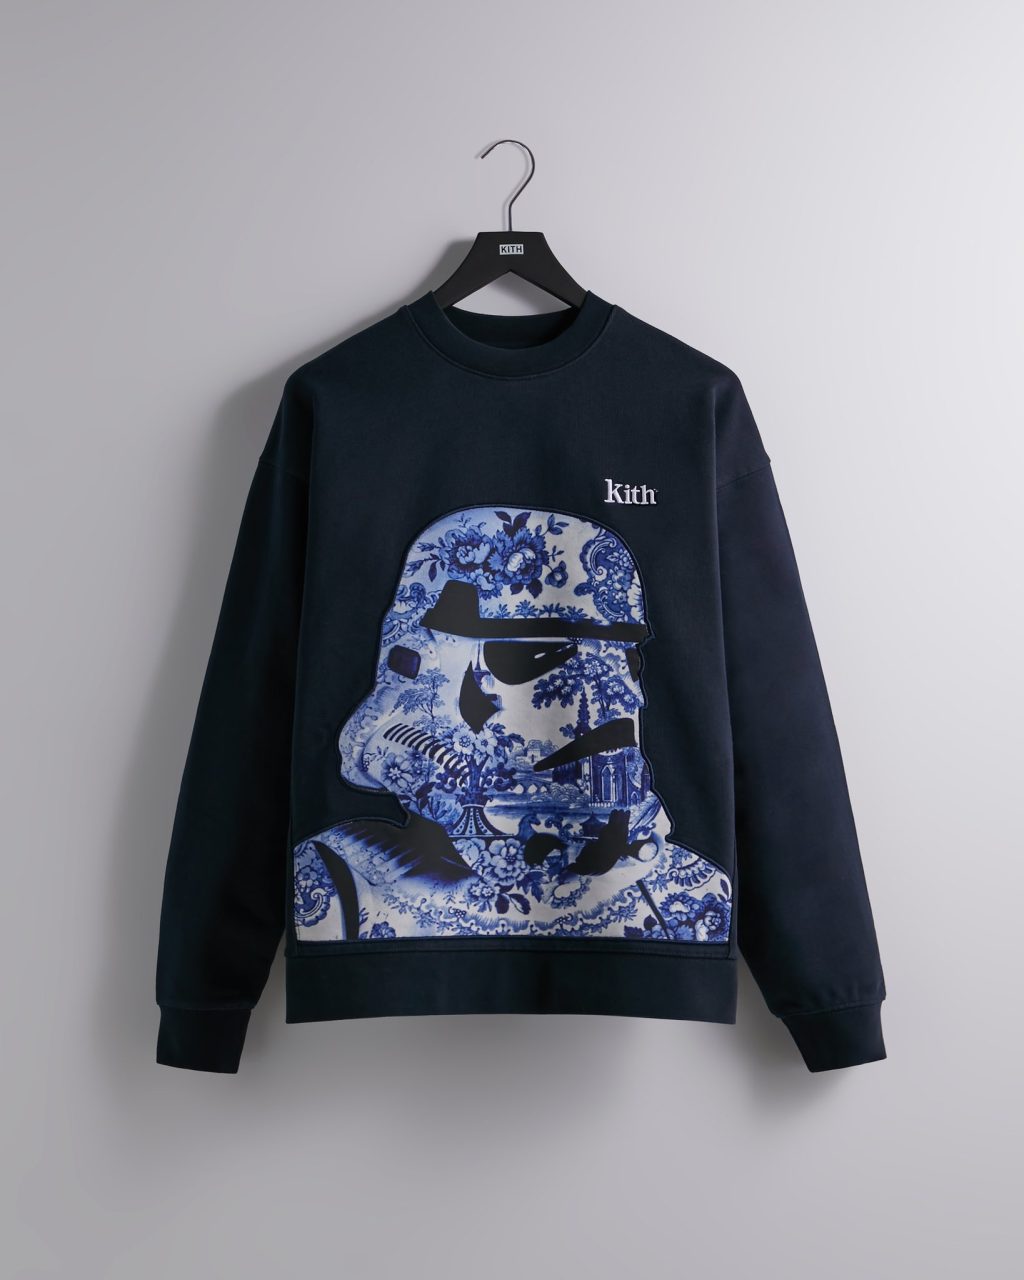 kith-star-wars-21aw-21fw-collaboration-release-20211220